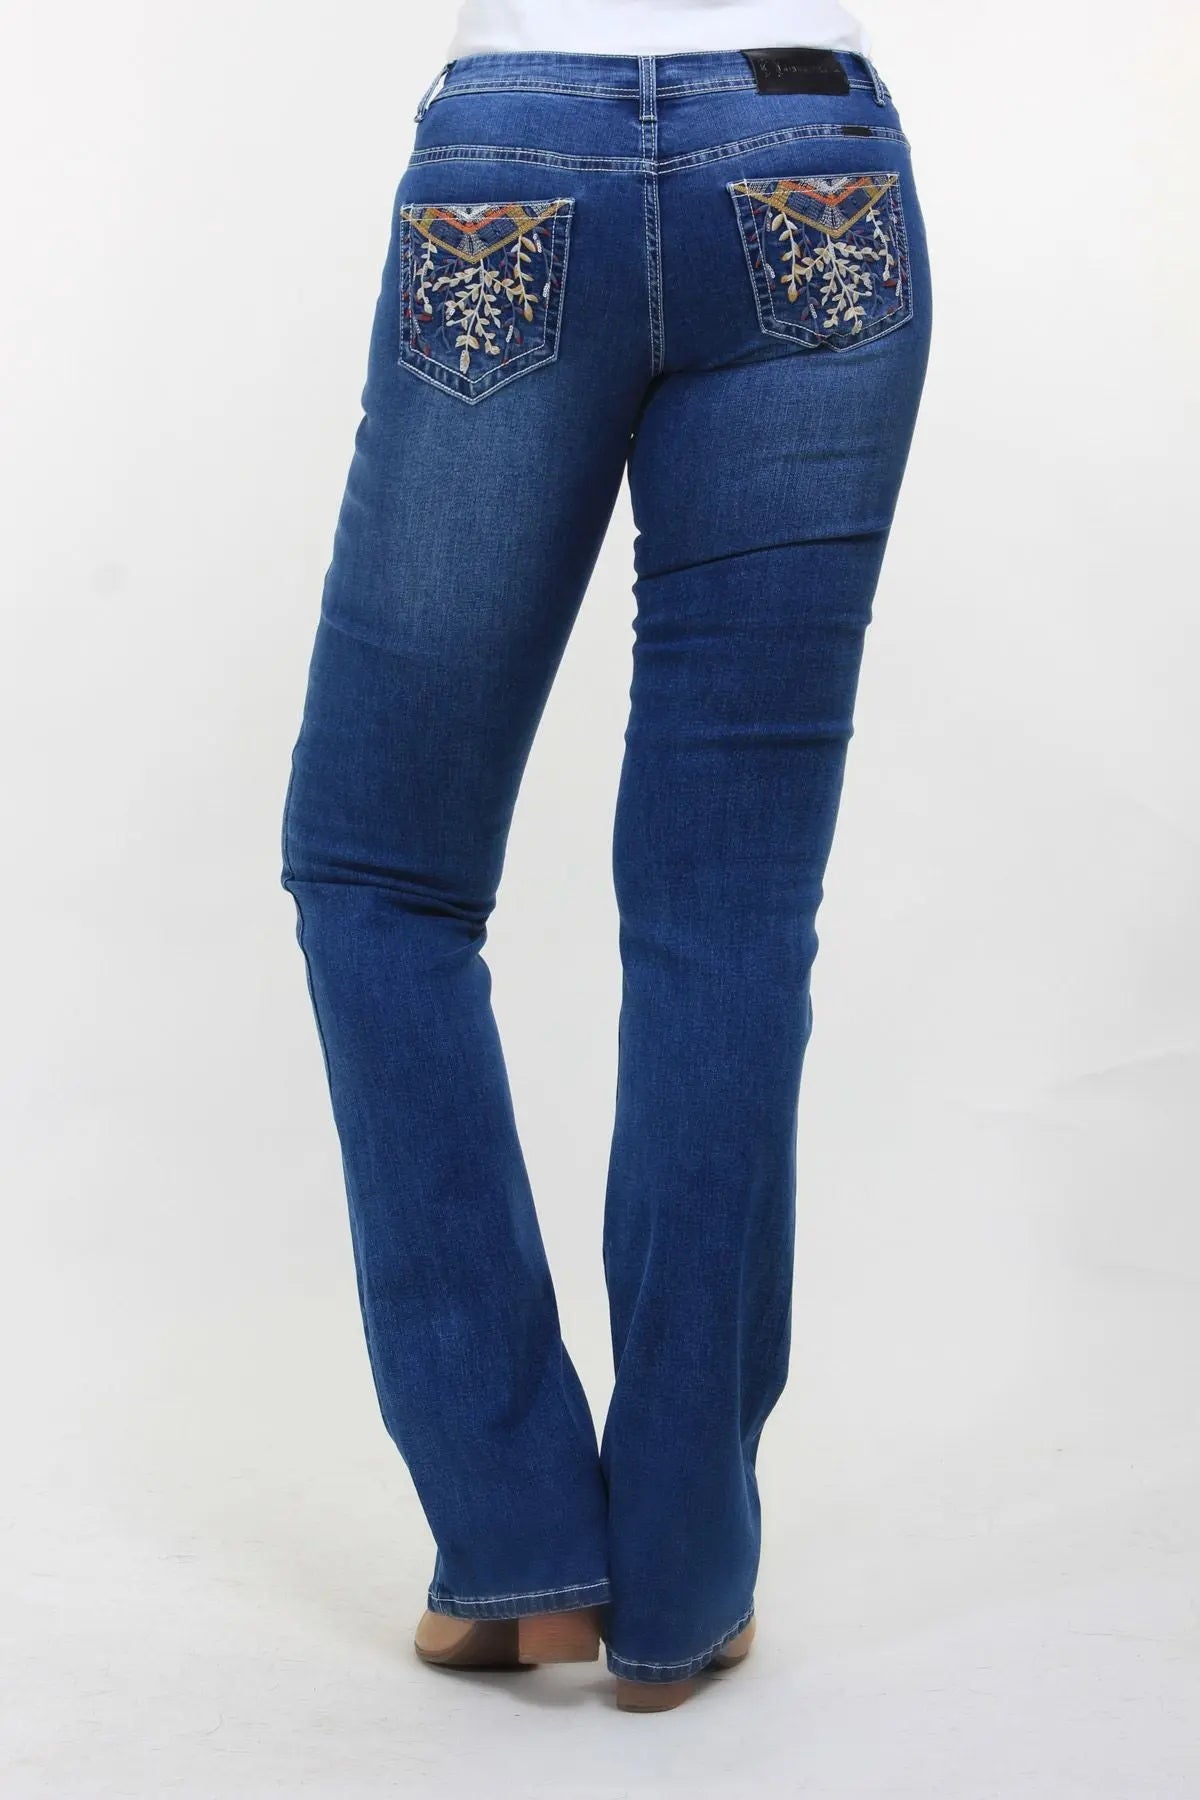 Maggie Boot Cut Riding Jeans Bling Jeans Outback Supply Co